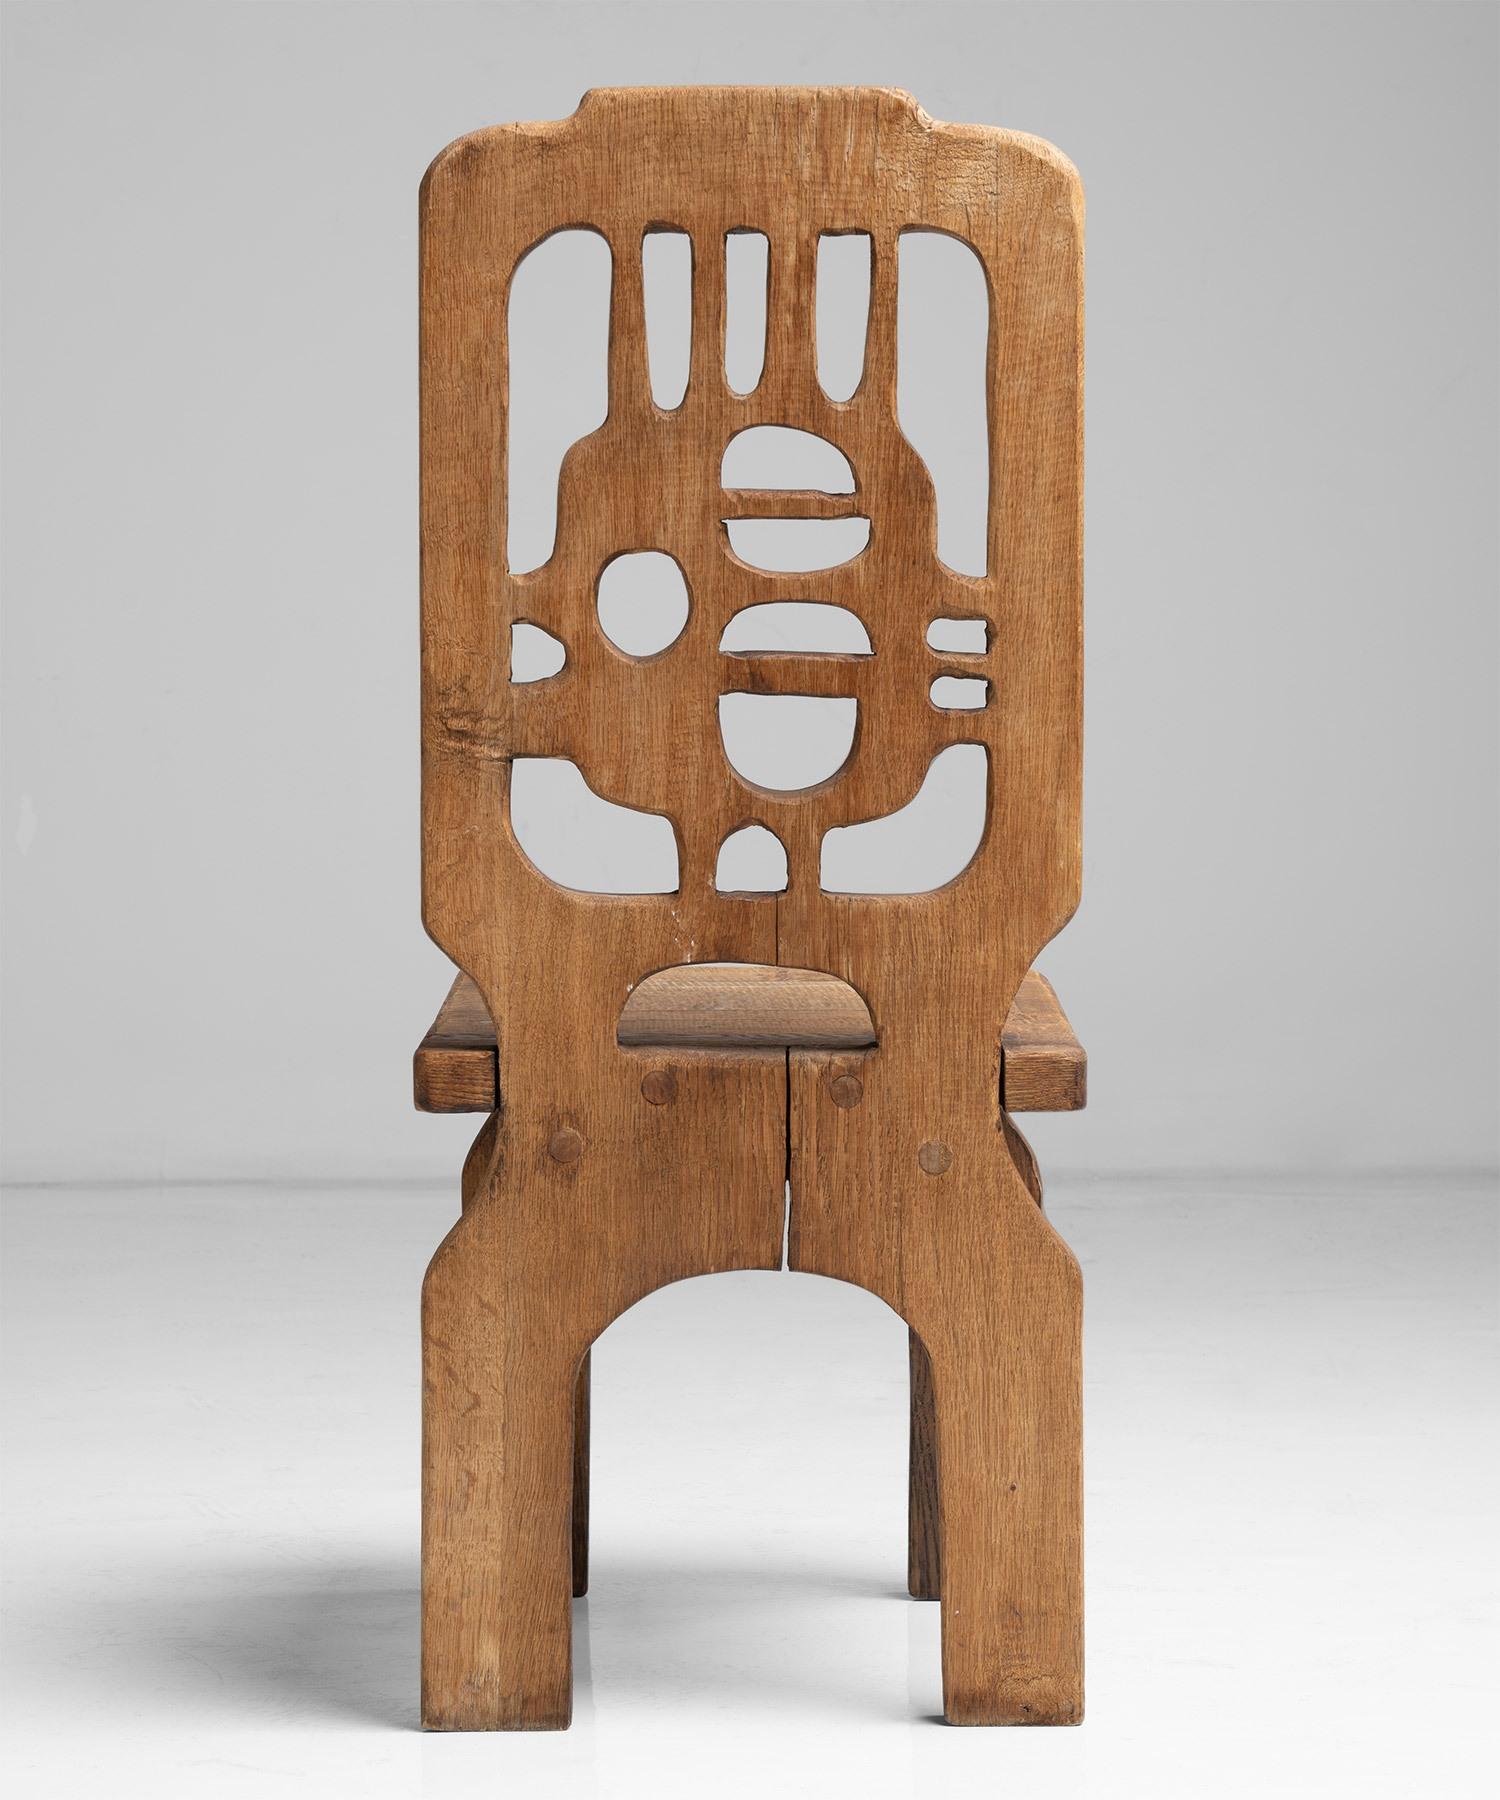 Carved Sculpture Chairs by Francesco Pasinato